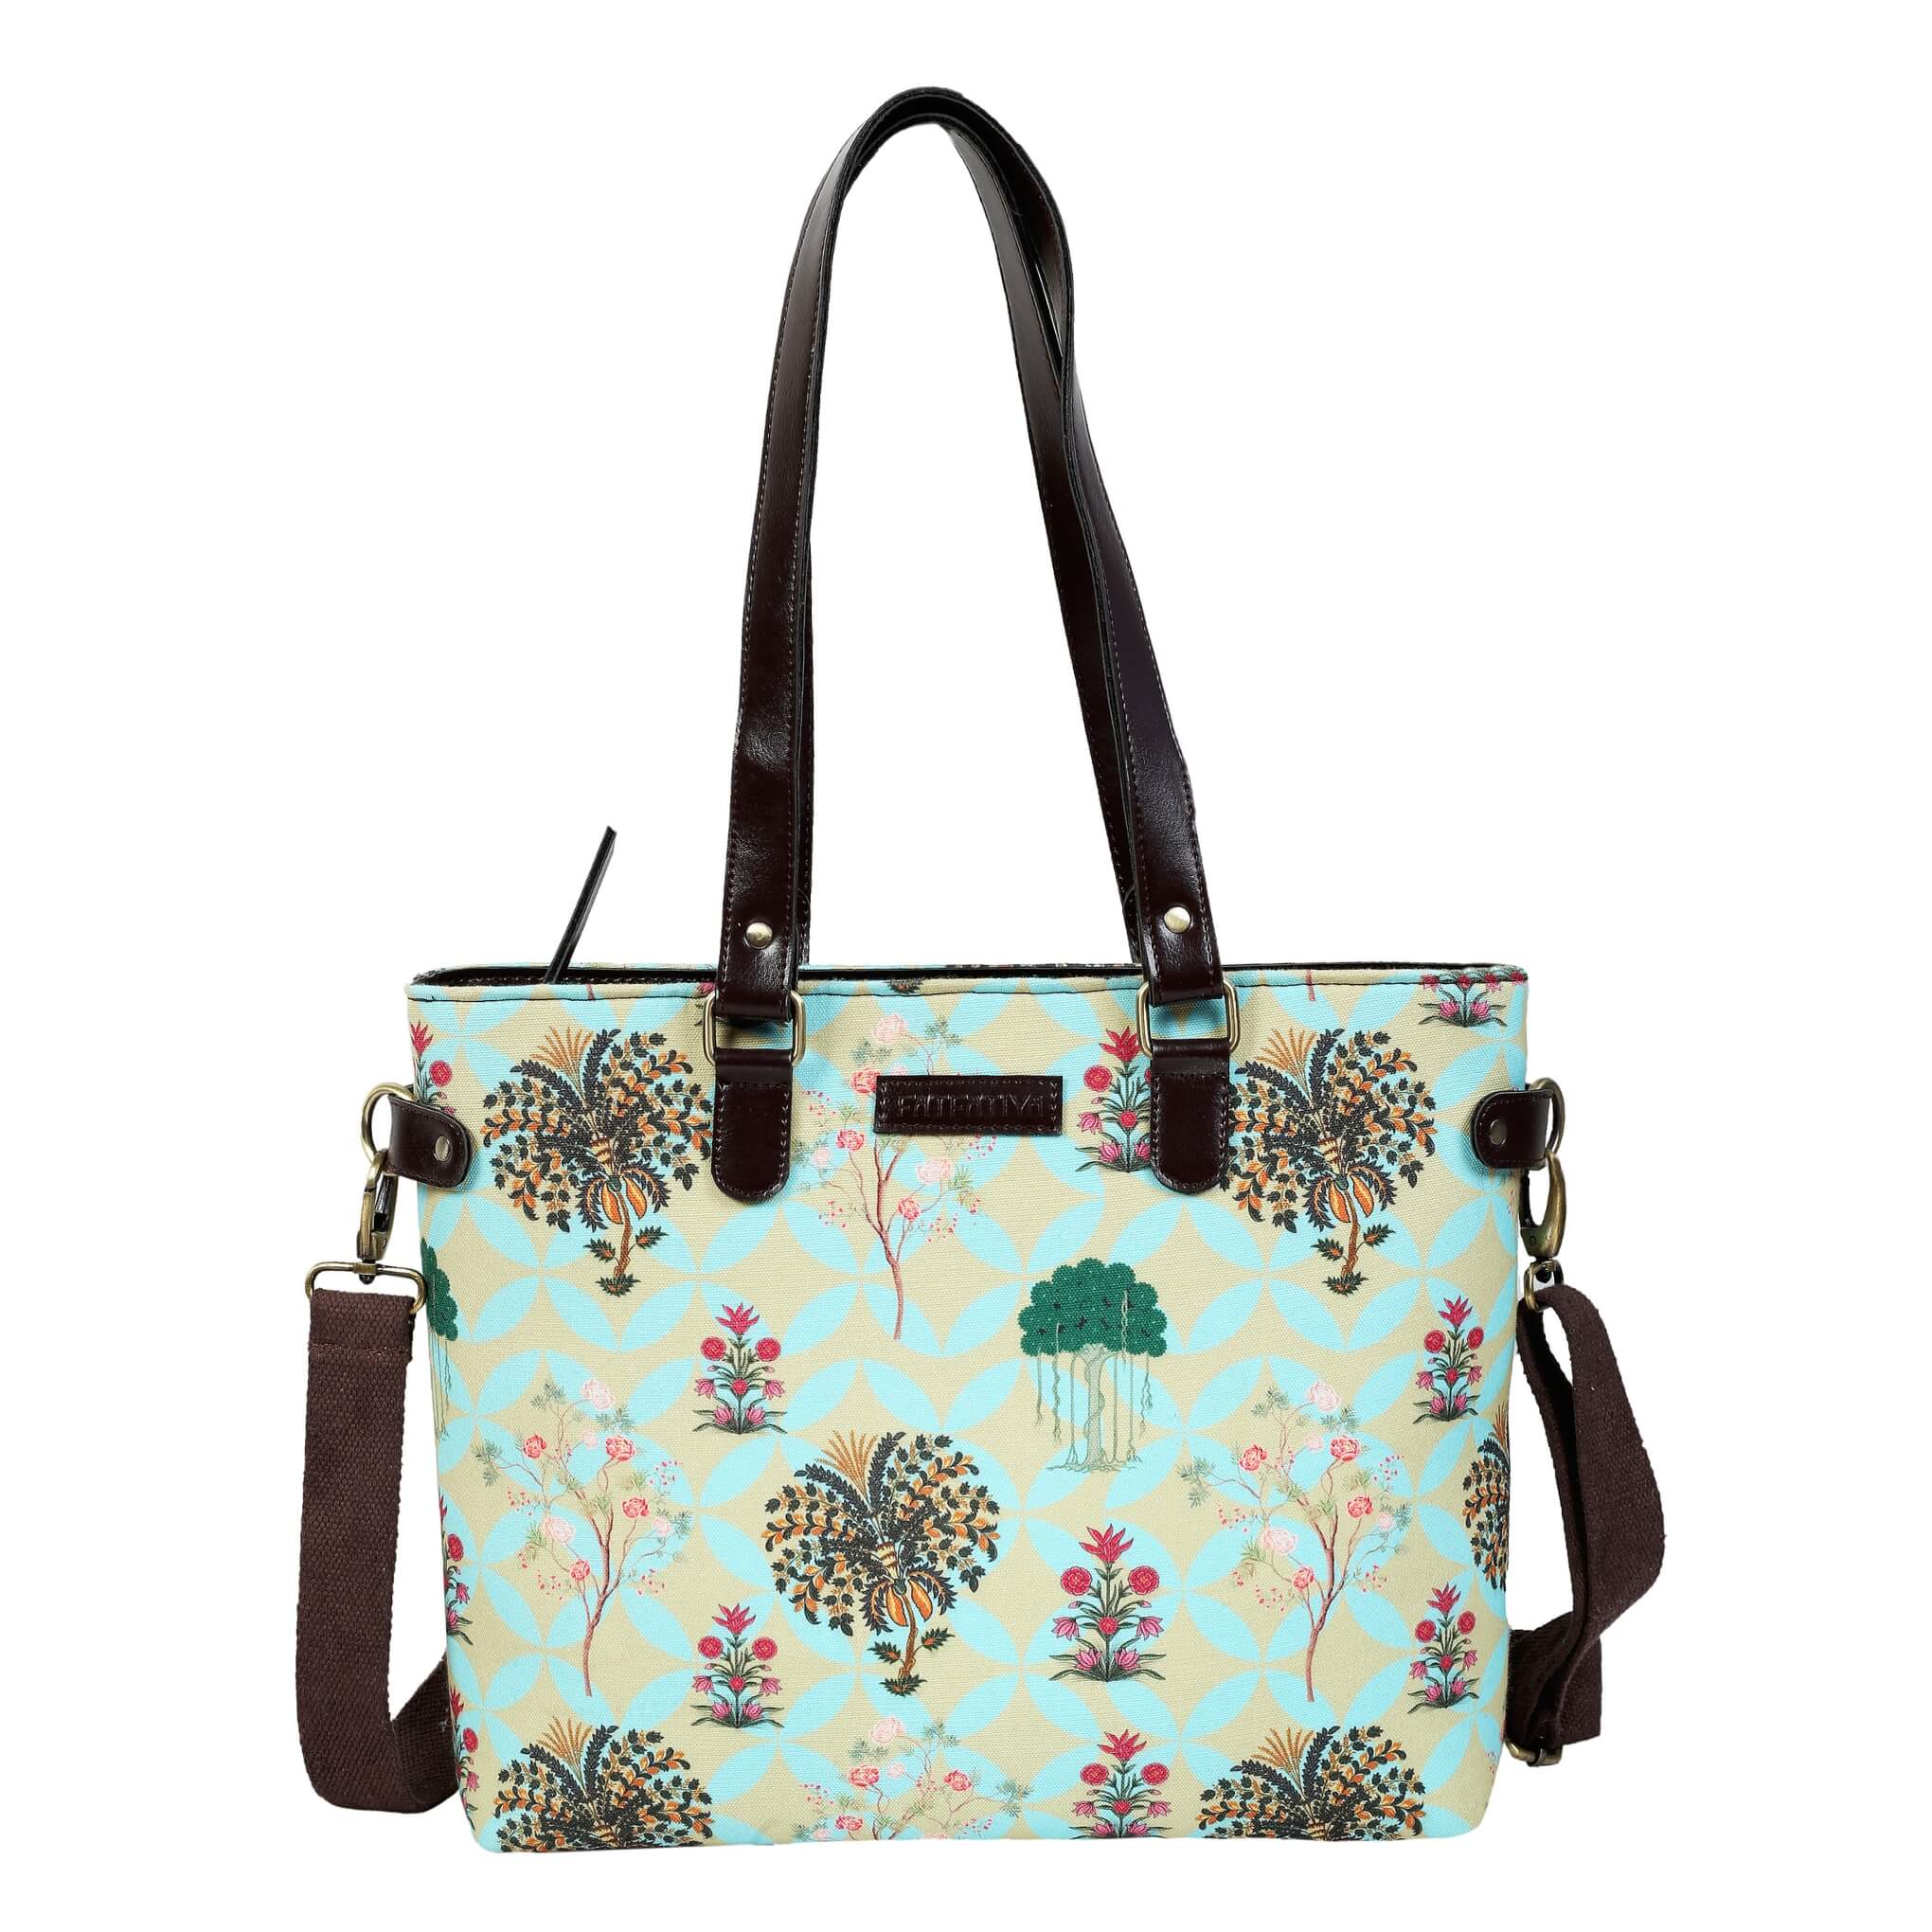 tote bag with zipper and pockets